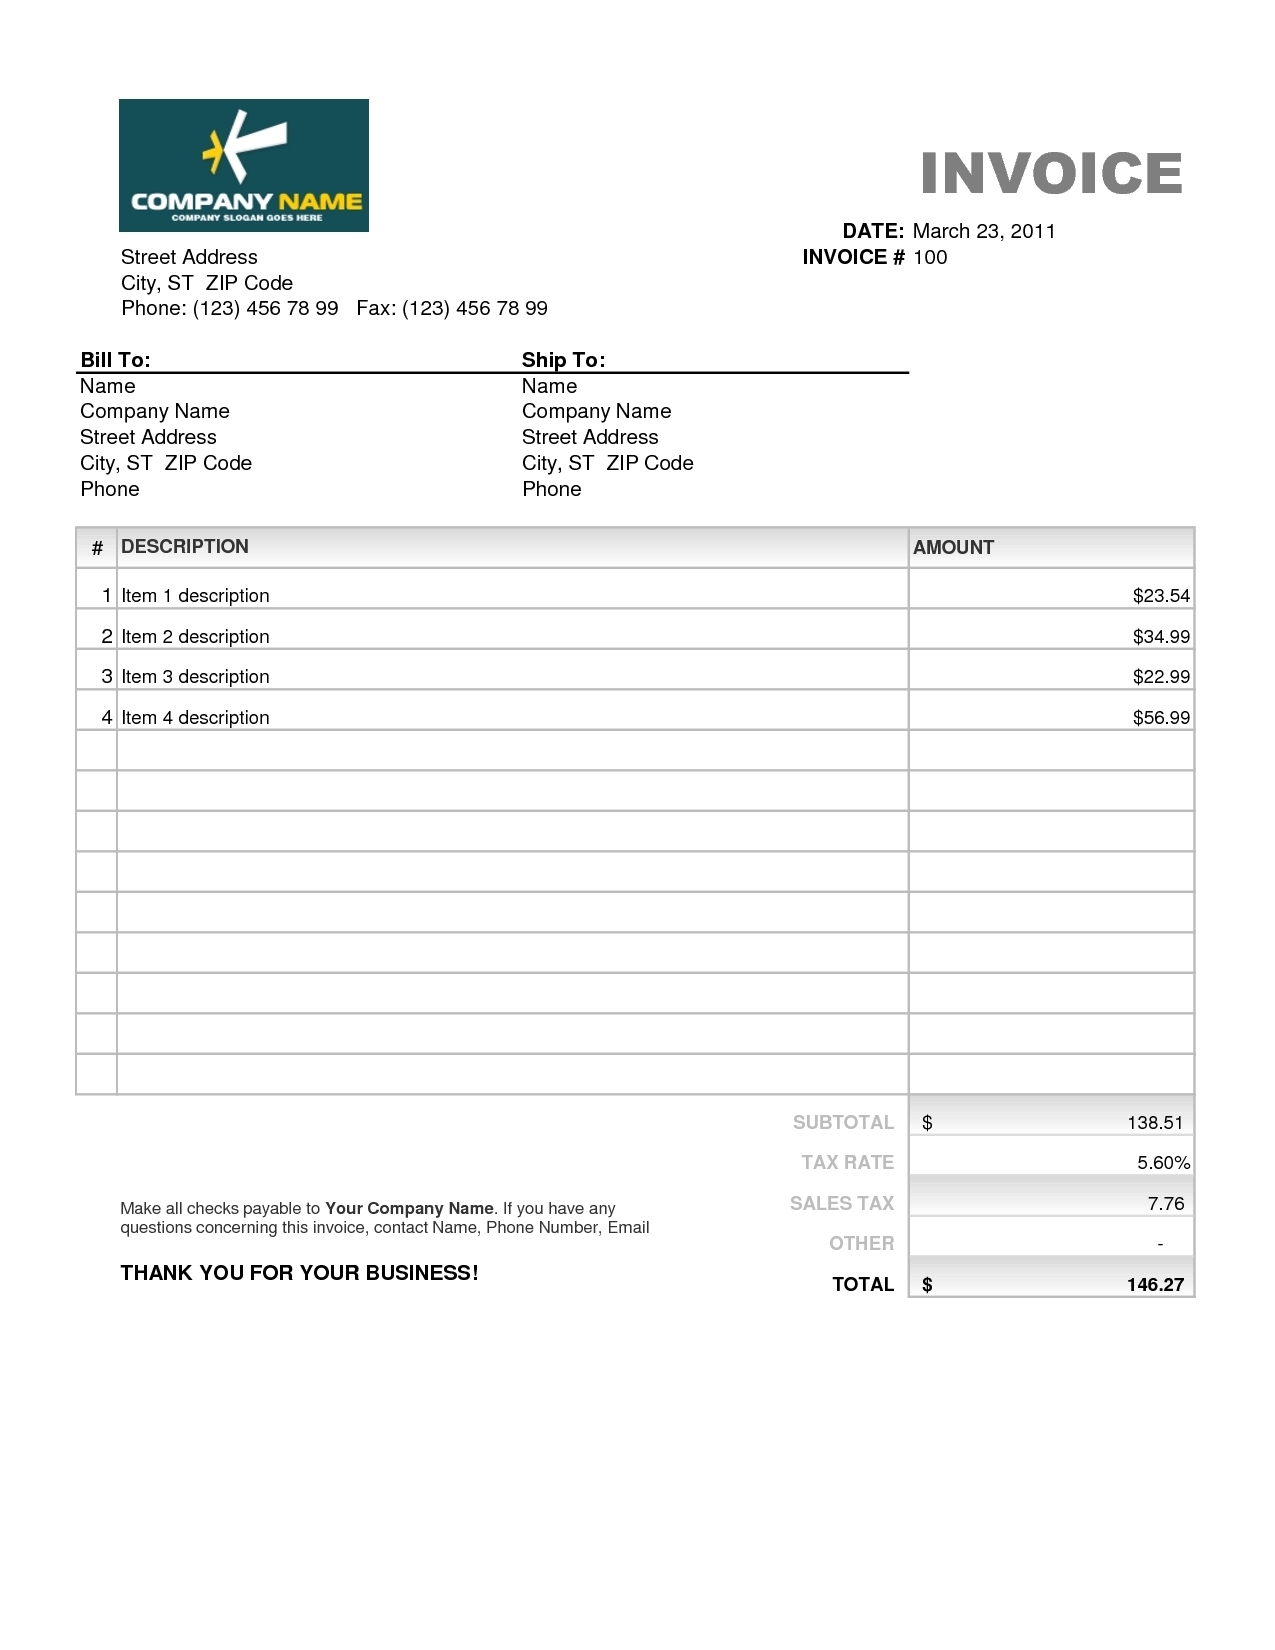 invoice excel template free download invoice template free 2016 free invoice template for excel